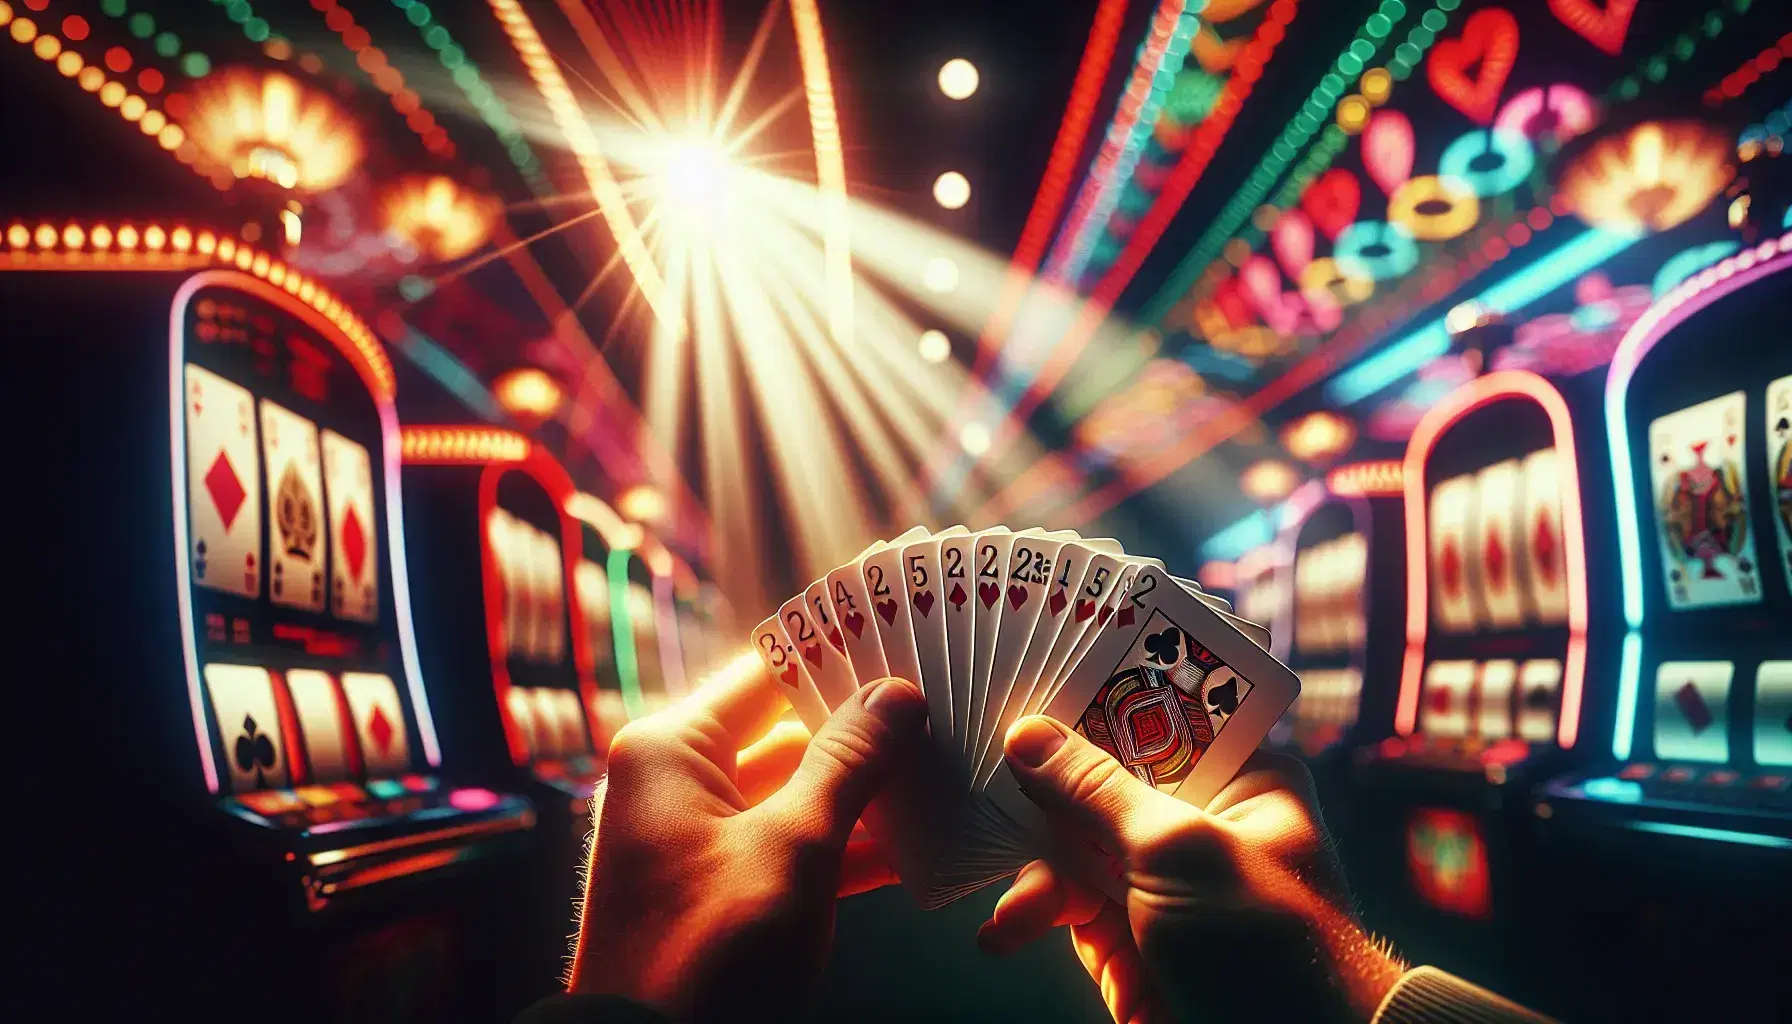 Close-up view of hands with a fanned deck of playing cards, poised to select one, against a blurred casino backdrop with bright slot machine lights.